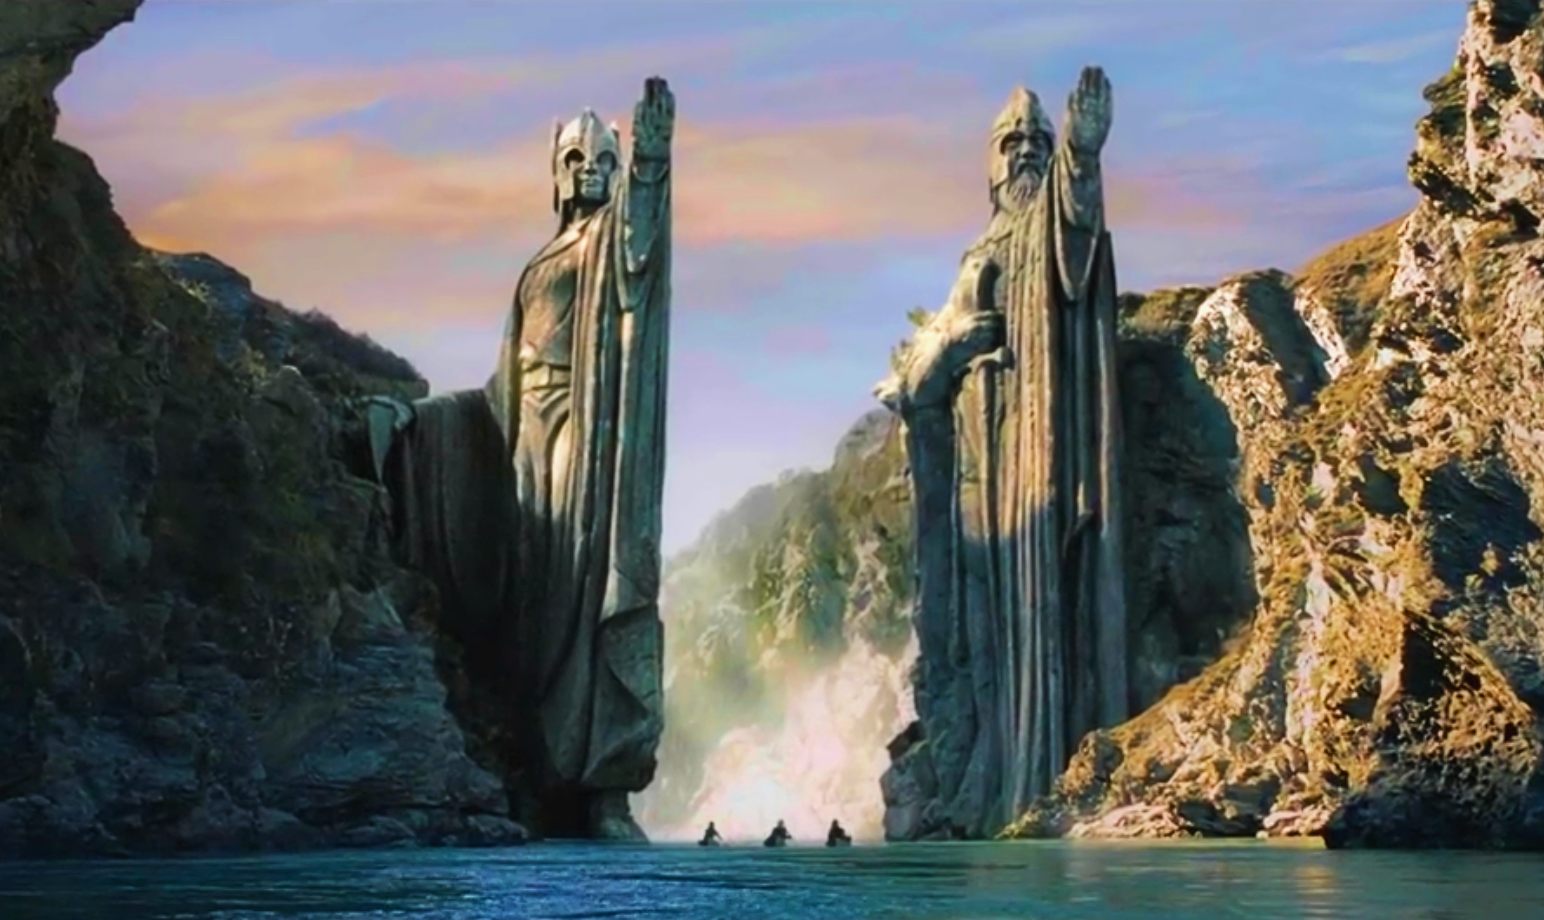 Gates of Argonath with small boats in water below